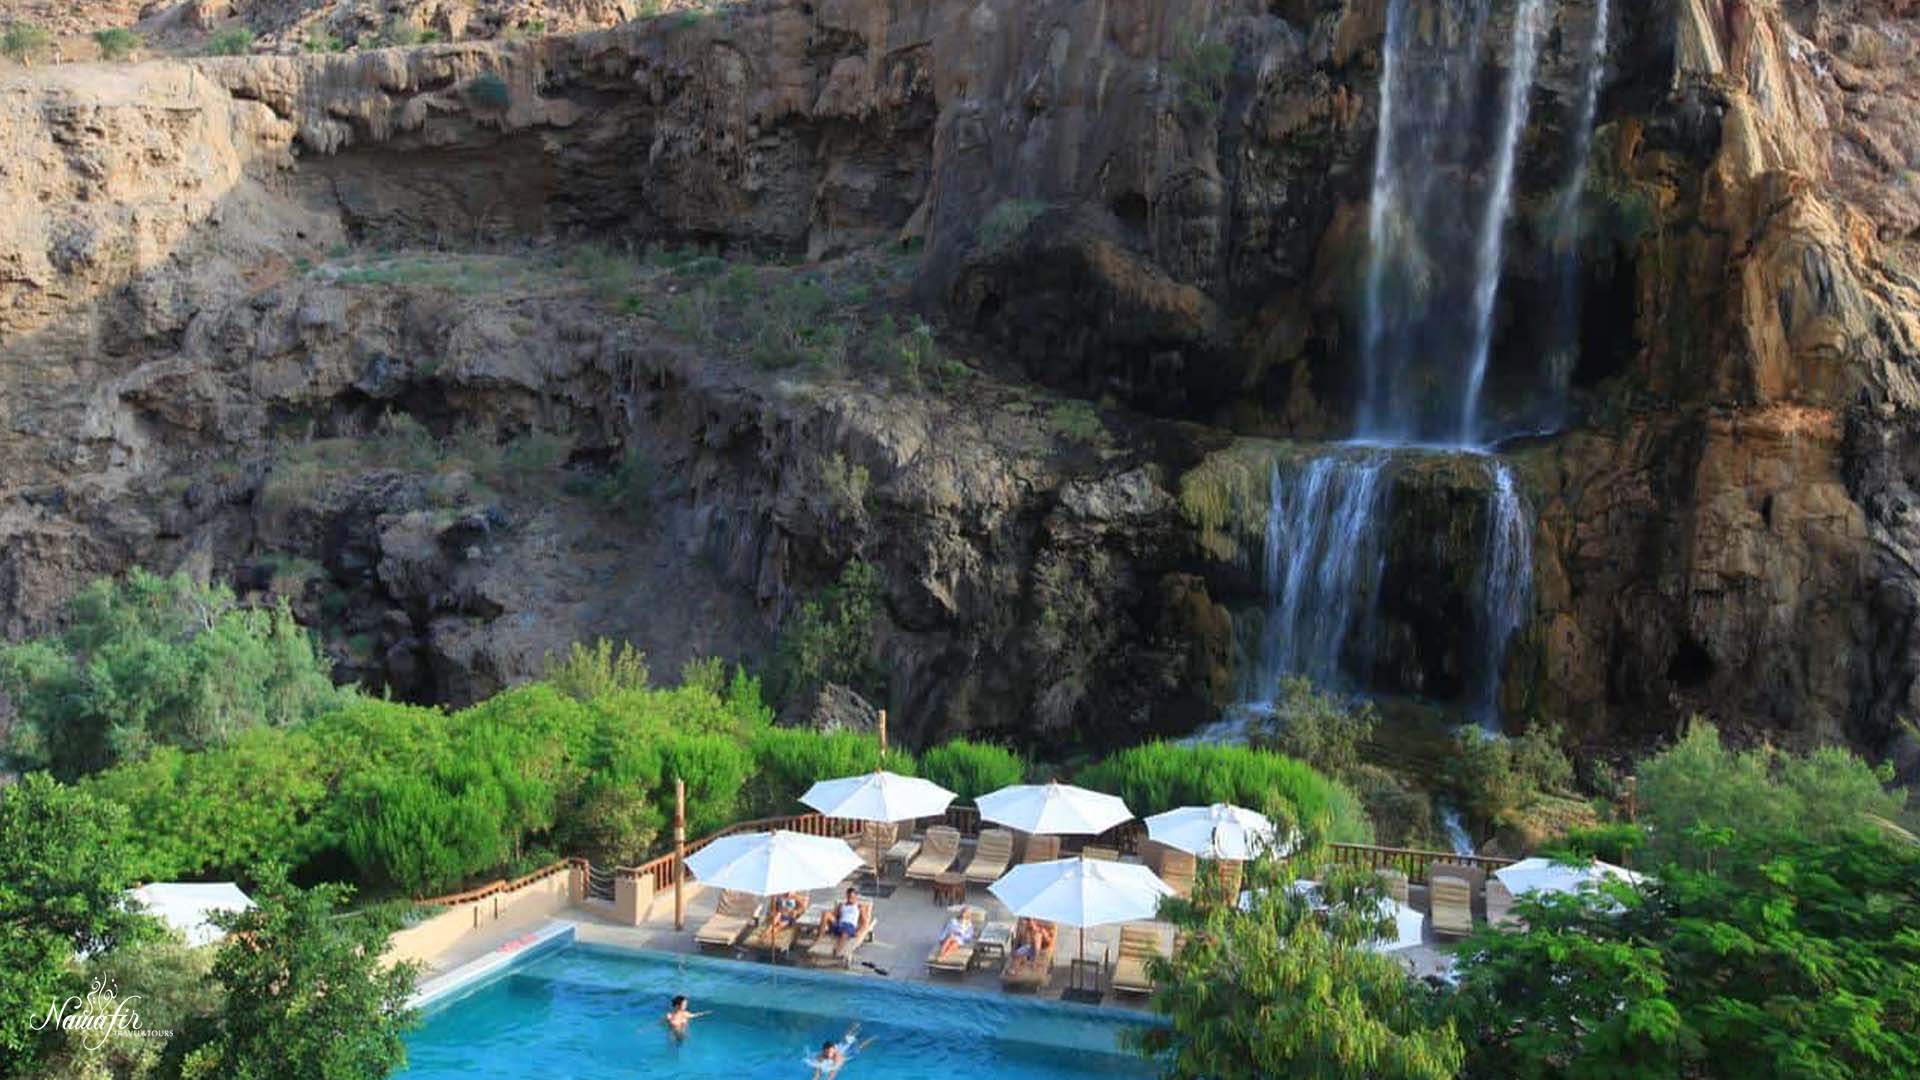 Ma’in Springs: A photograph immortalizes the picturesque Ma'in Springs, nestled within the serene Dead Sea Valley, as cascading waterfalls form a captivating backdrop.